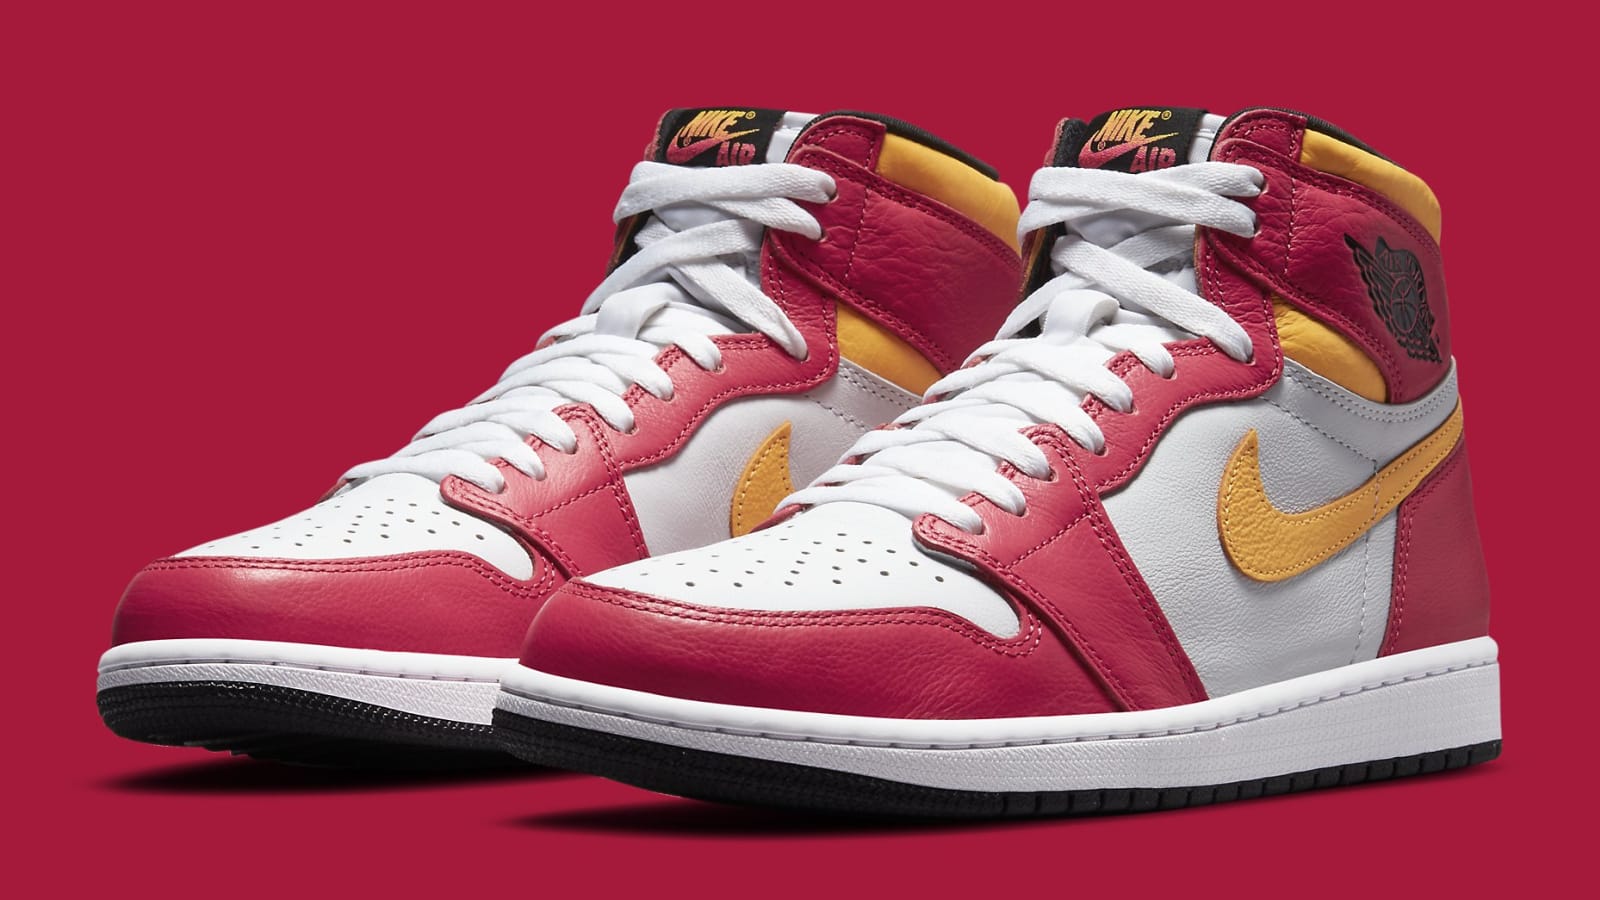 Air Jordan 1 "Light Fusion Red" Officially Unveiled: Phot...